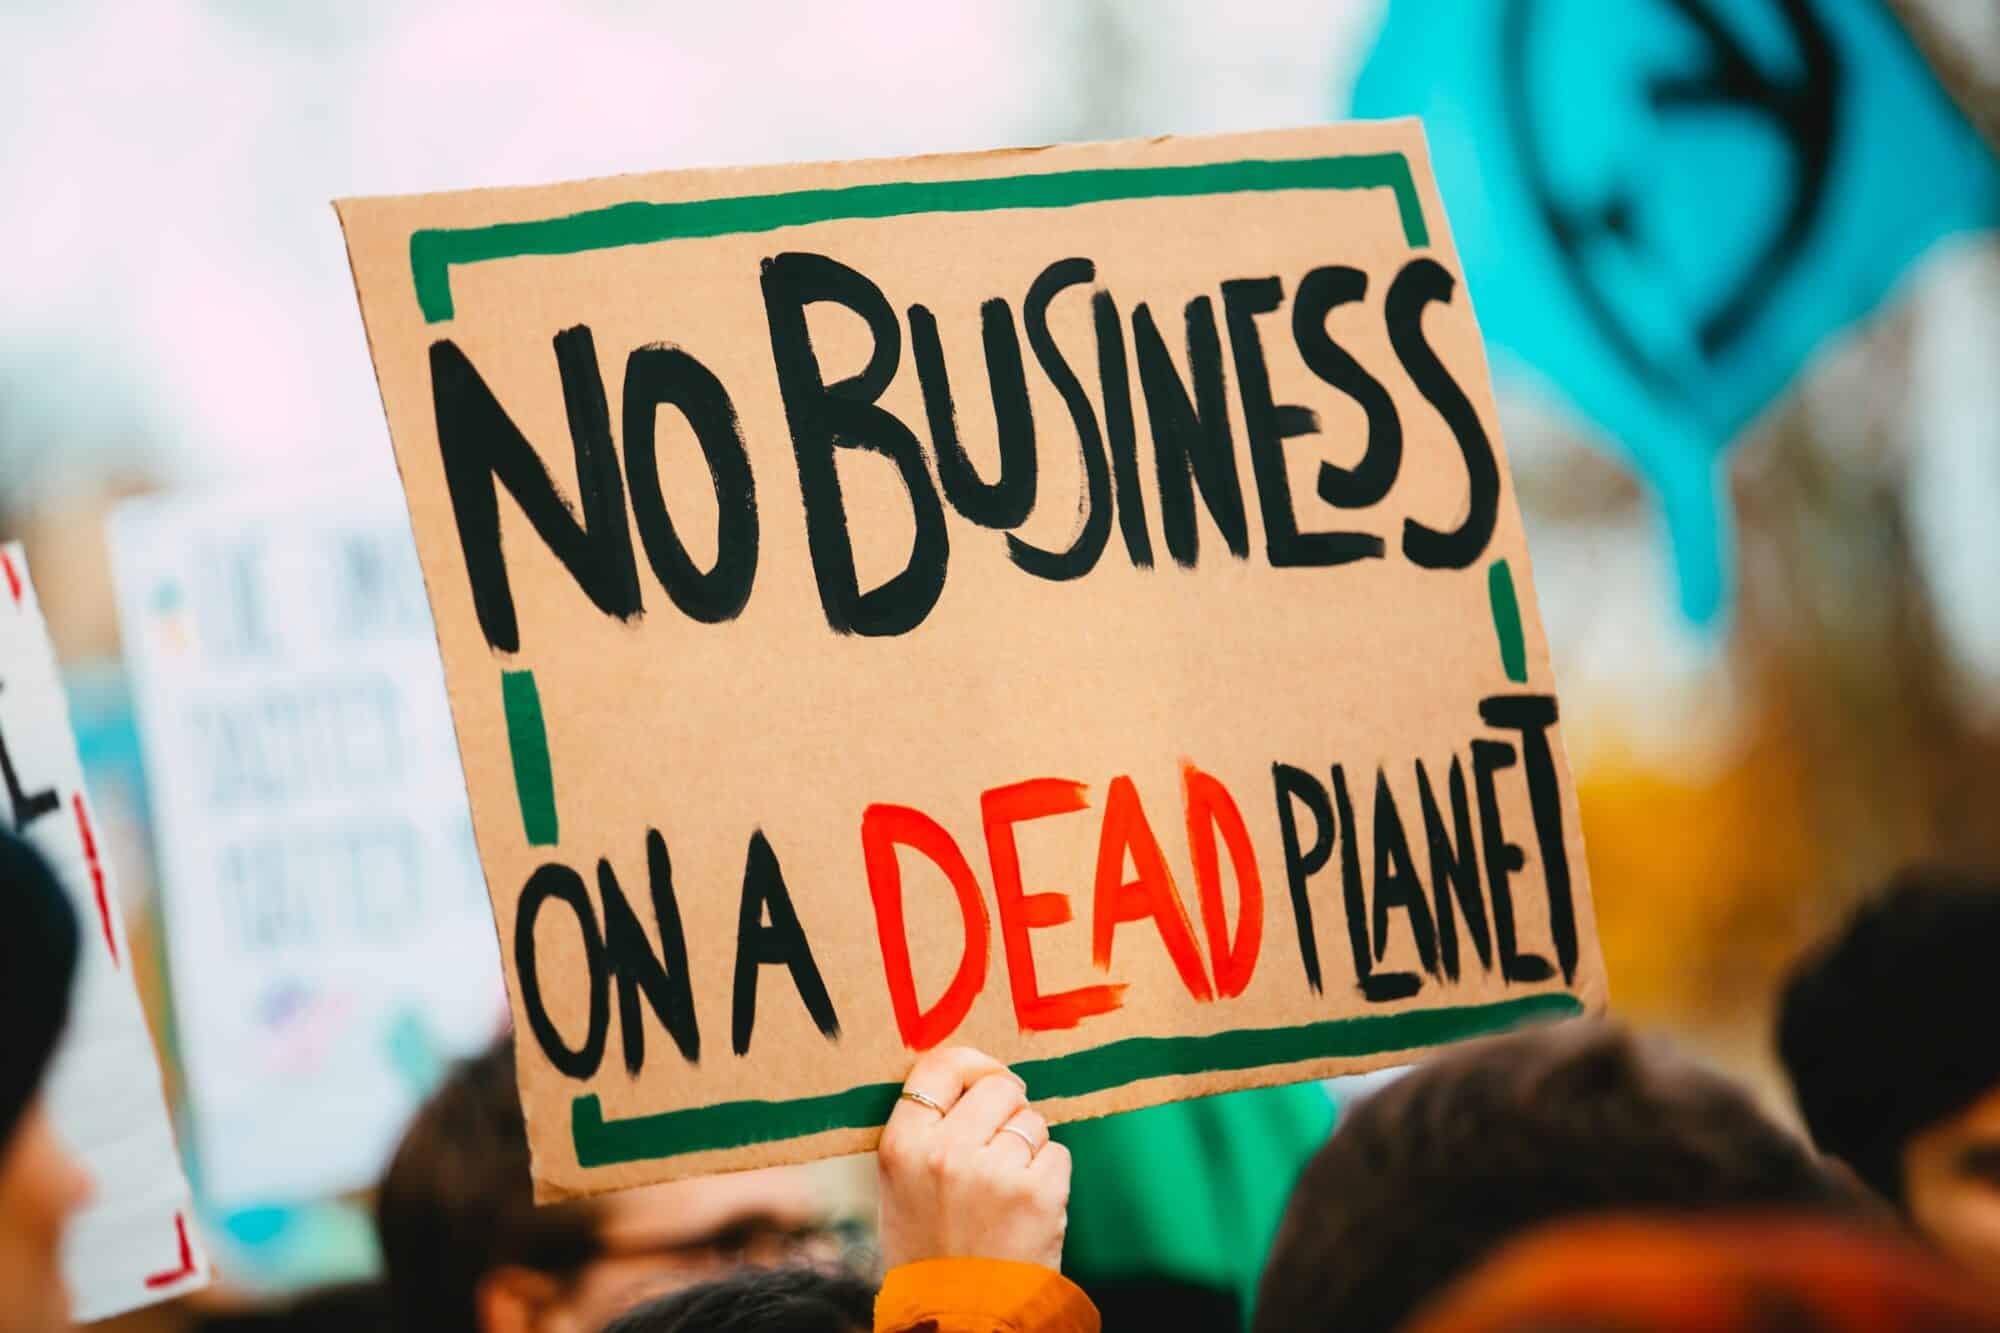 A climate protester holds up a sign that reads "No business on a dead planet".